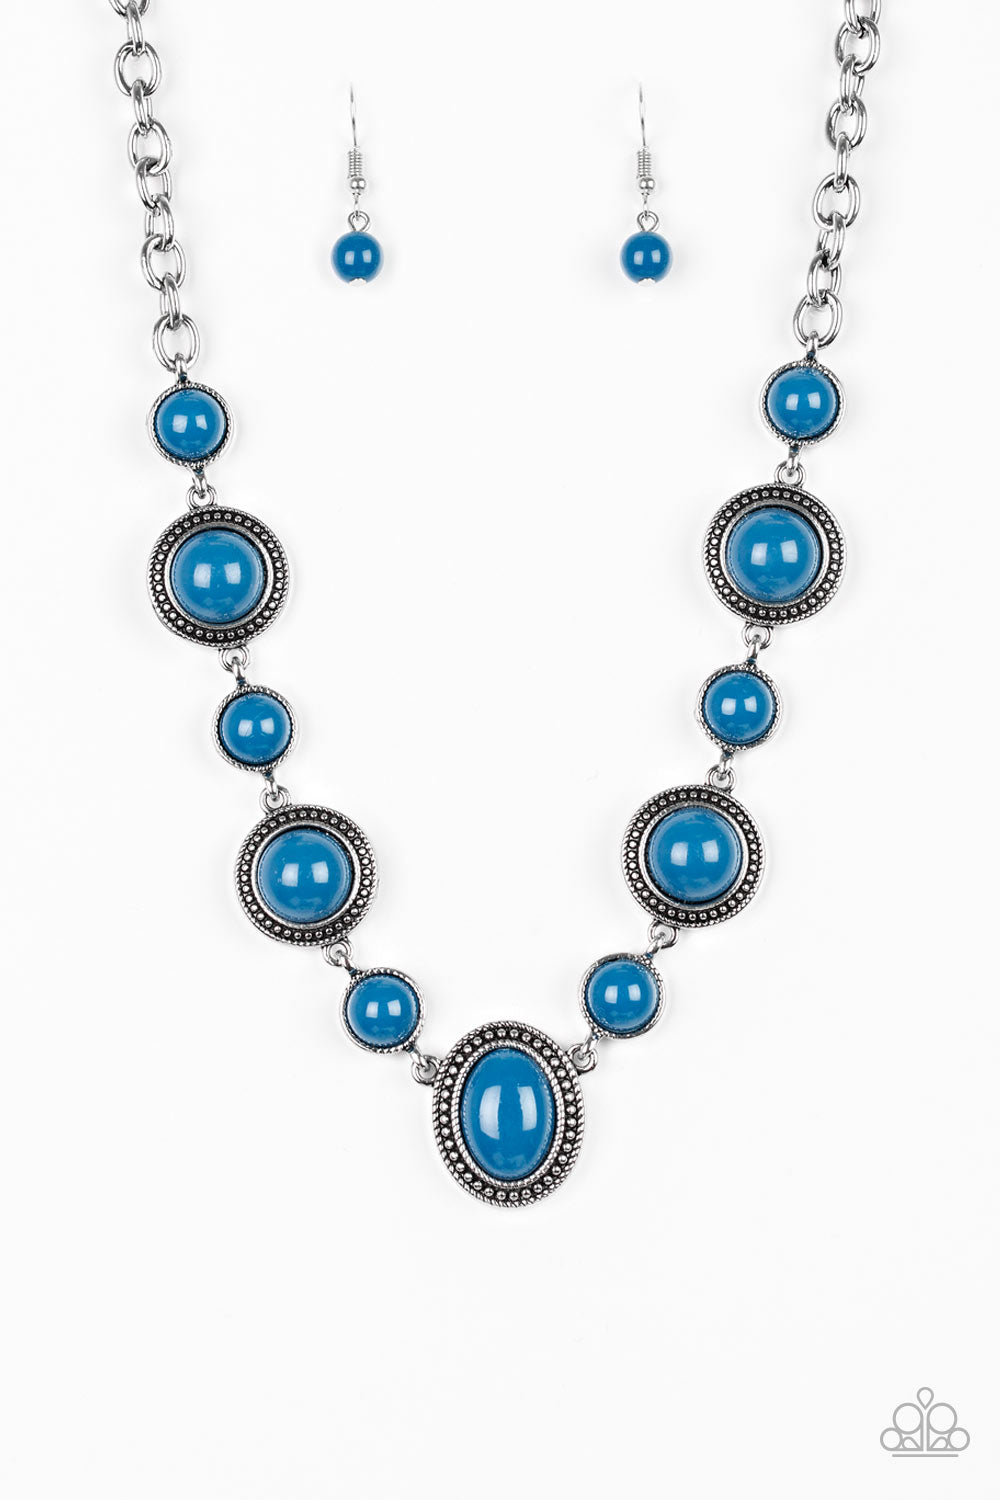 &lt;P&gt;Featuring smooth and studded silver frames, refreshing blue beads link below the collar in a seasonal fashion. Features an adjustable clasp closure.&lt;/p&gt;

&lt;P&gt;&lt;i&gt; Sold as one individual necklace.  Includes one pair of matching earrings.
&lt;/i&gt;&lt;/p&gt;

&lt;img src=\&quot;https://d9b54x484lq62.cloudfront.net/paparazzi/shopping/images/517_tag150x115_1.png\&quot; alt=\&quot;New Kit\&quot; align=\&quot;middle\&quot; height=\&quot;50\&quot; width=\&quot;50\&quot;/&gt;